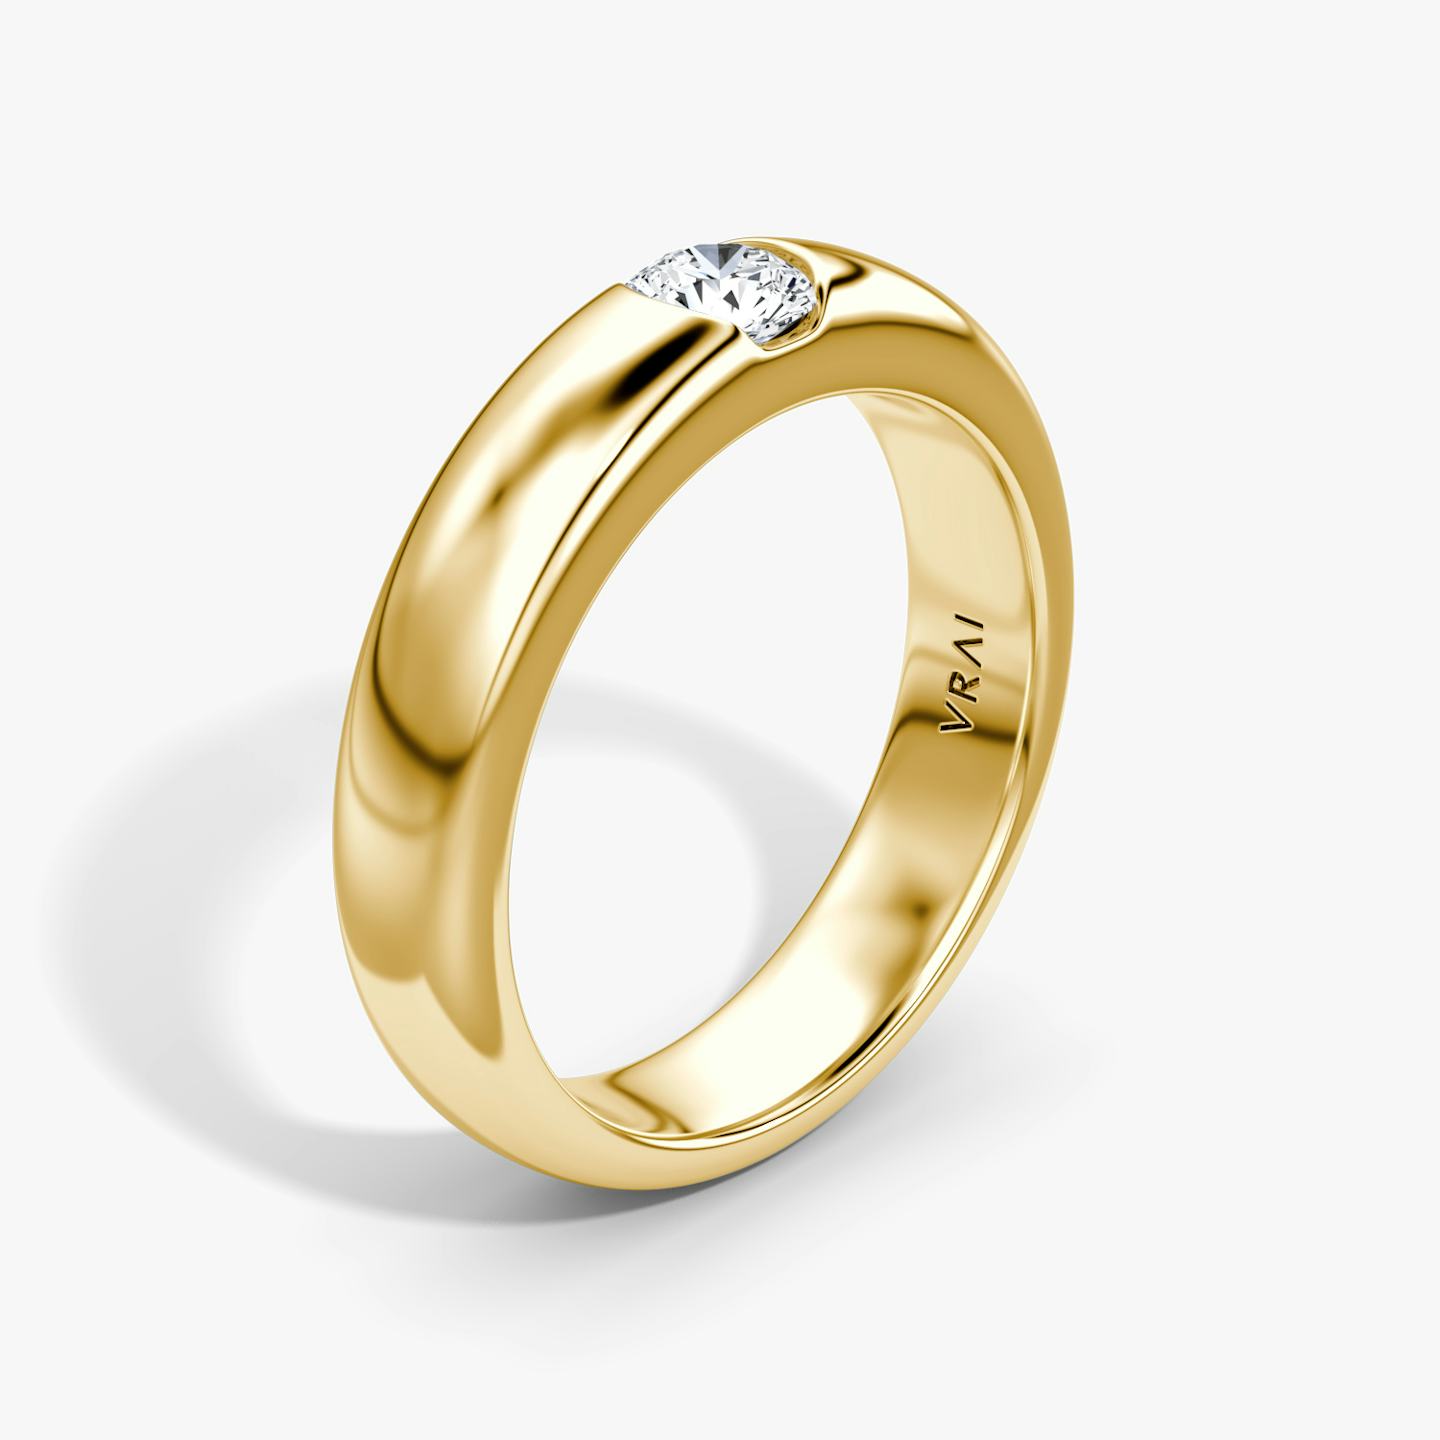 The Round Inlay Band | Round Brilliant | 18k | 18k Yellow Gold | Version: Large